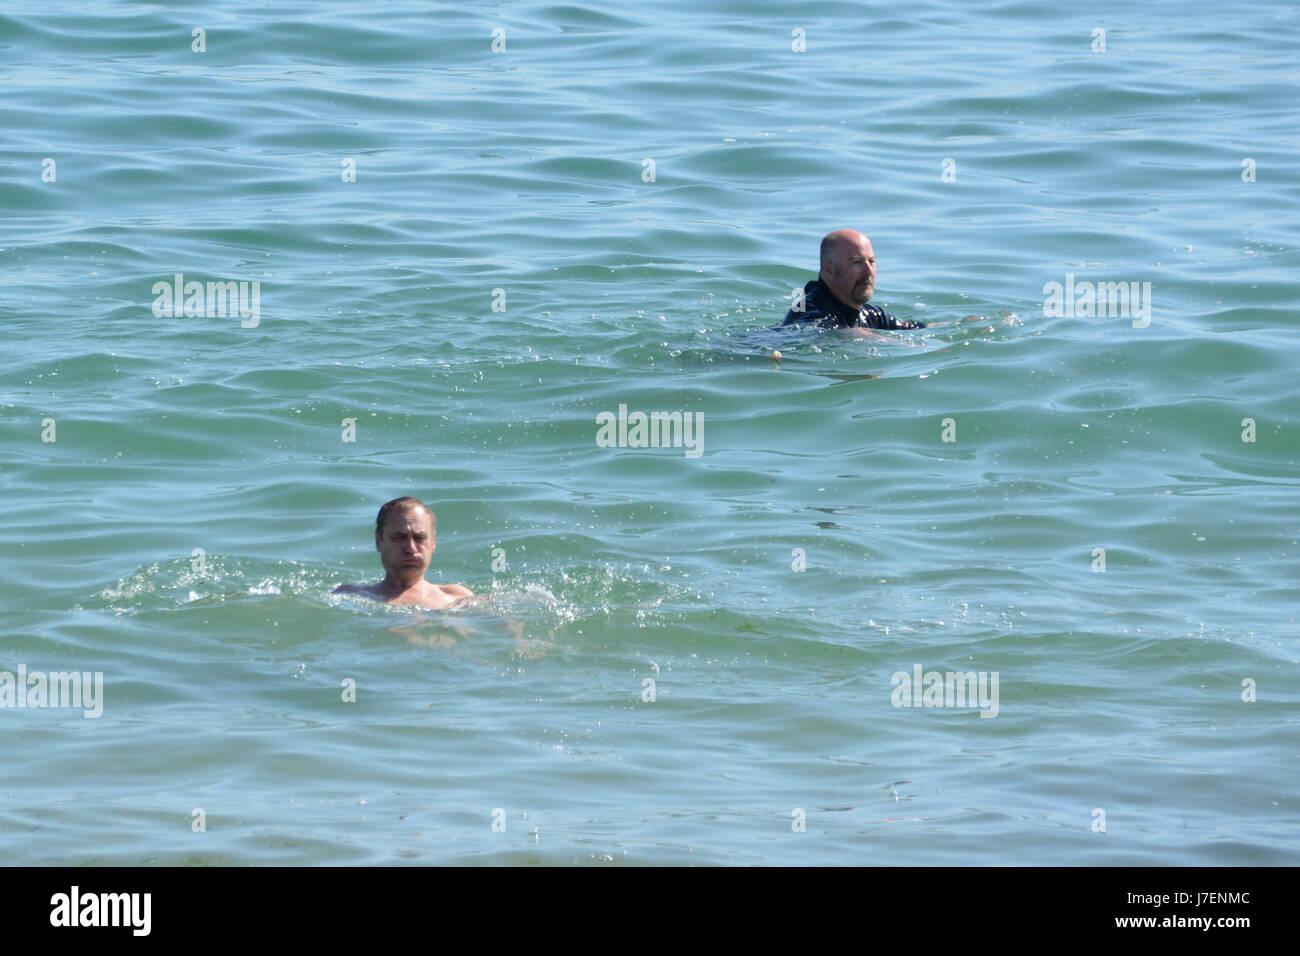 Marazion, Cornwall, UK. 24th May 2017. UK Weather. After a foggy day yesterday, the sun finally shone over Cornwall today. These two chaps went for a swim at Marazion, although it looks like the water was still a bit chilly. Credit: cwallpix/Alamy Live News Stock Photo